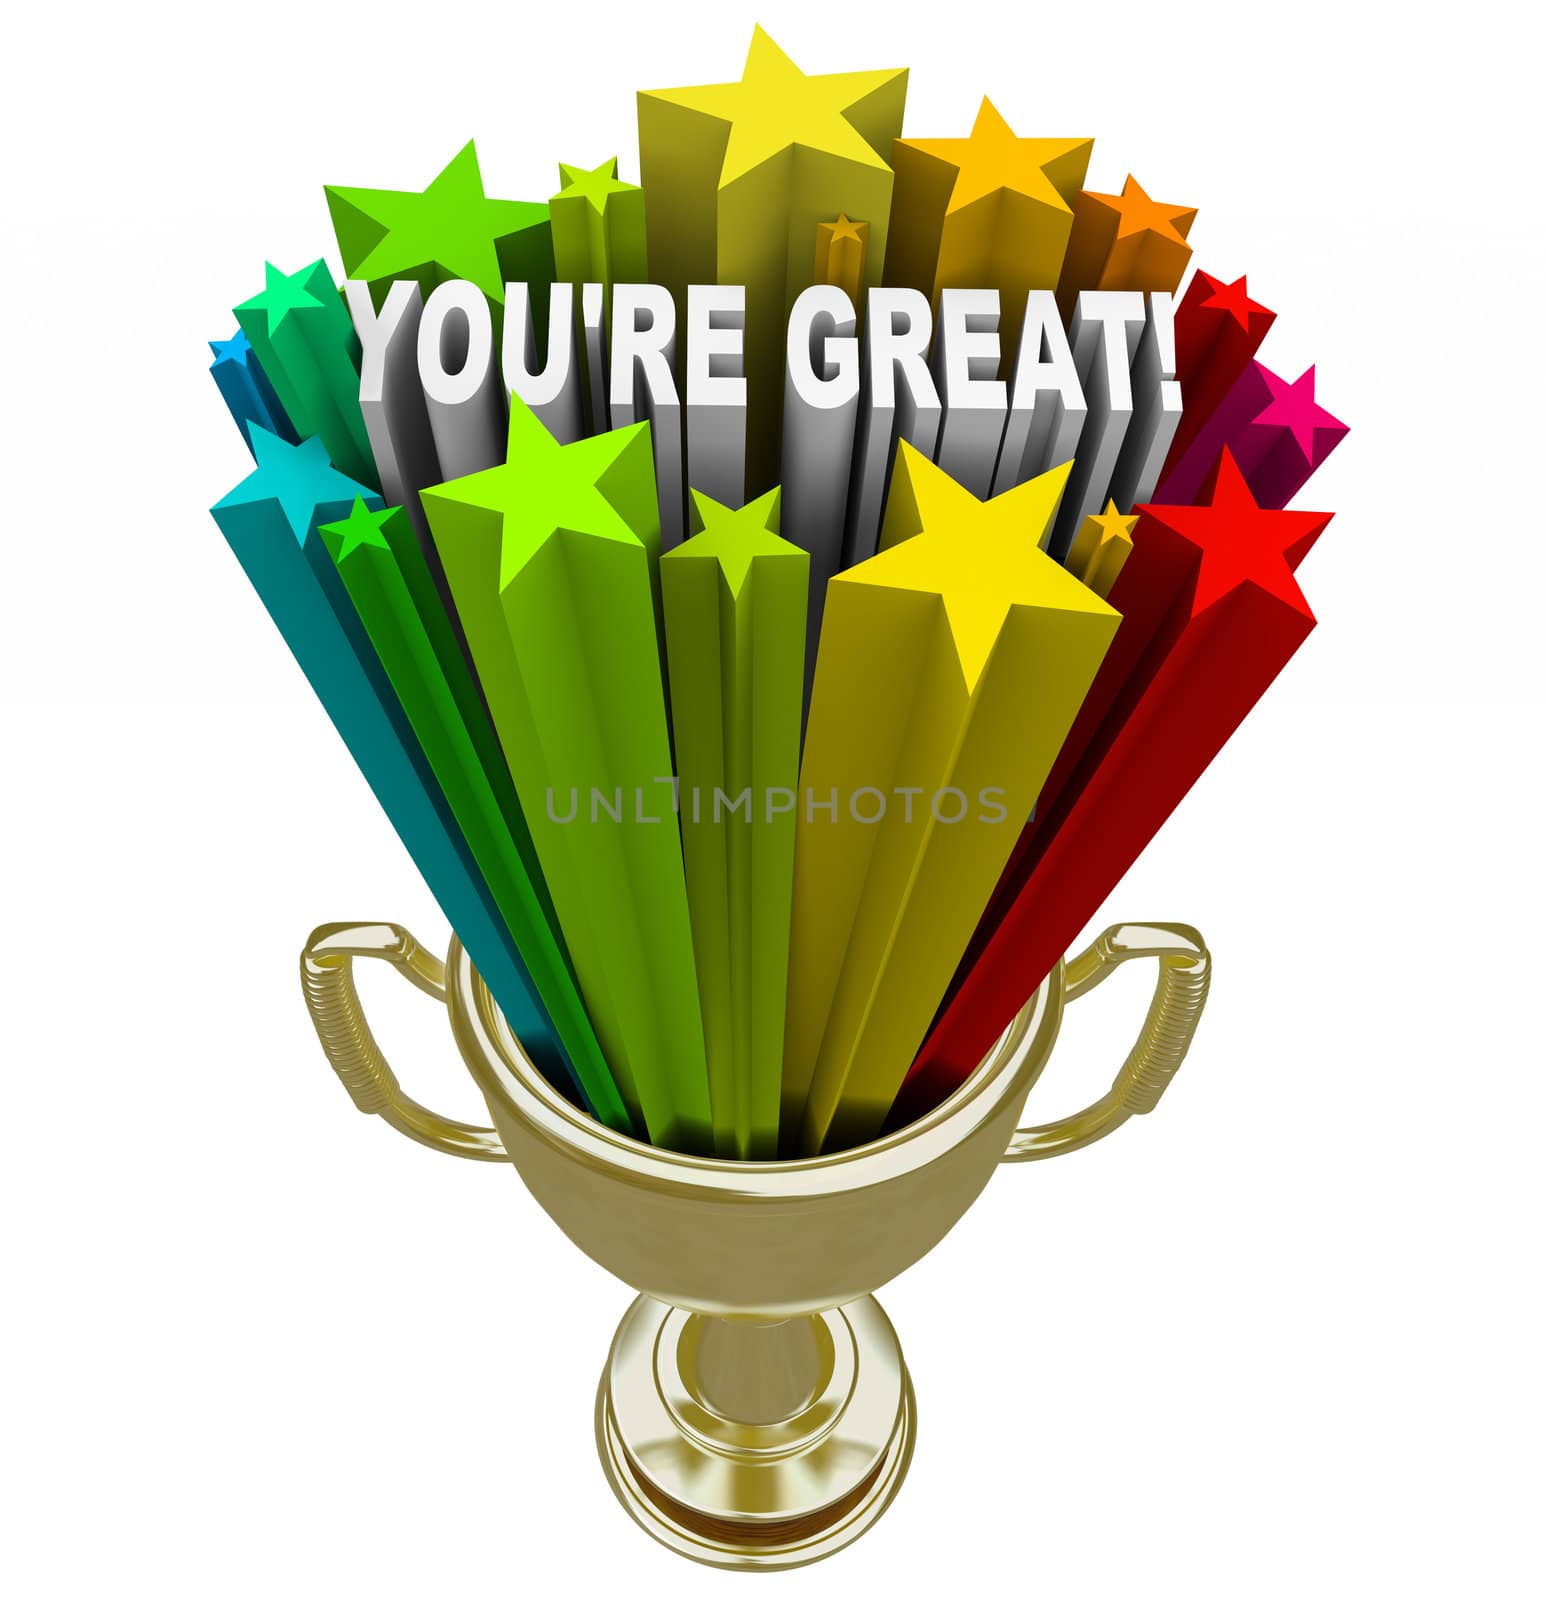 You're Great - Words of Praise in Winner Trophy by iQoncept